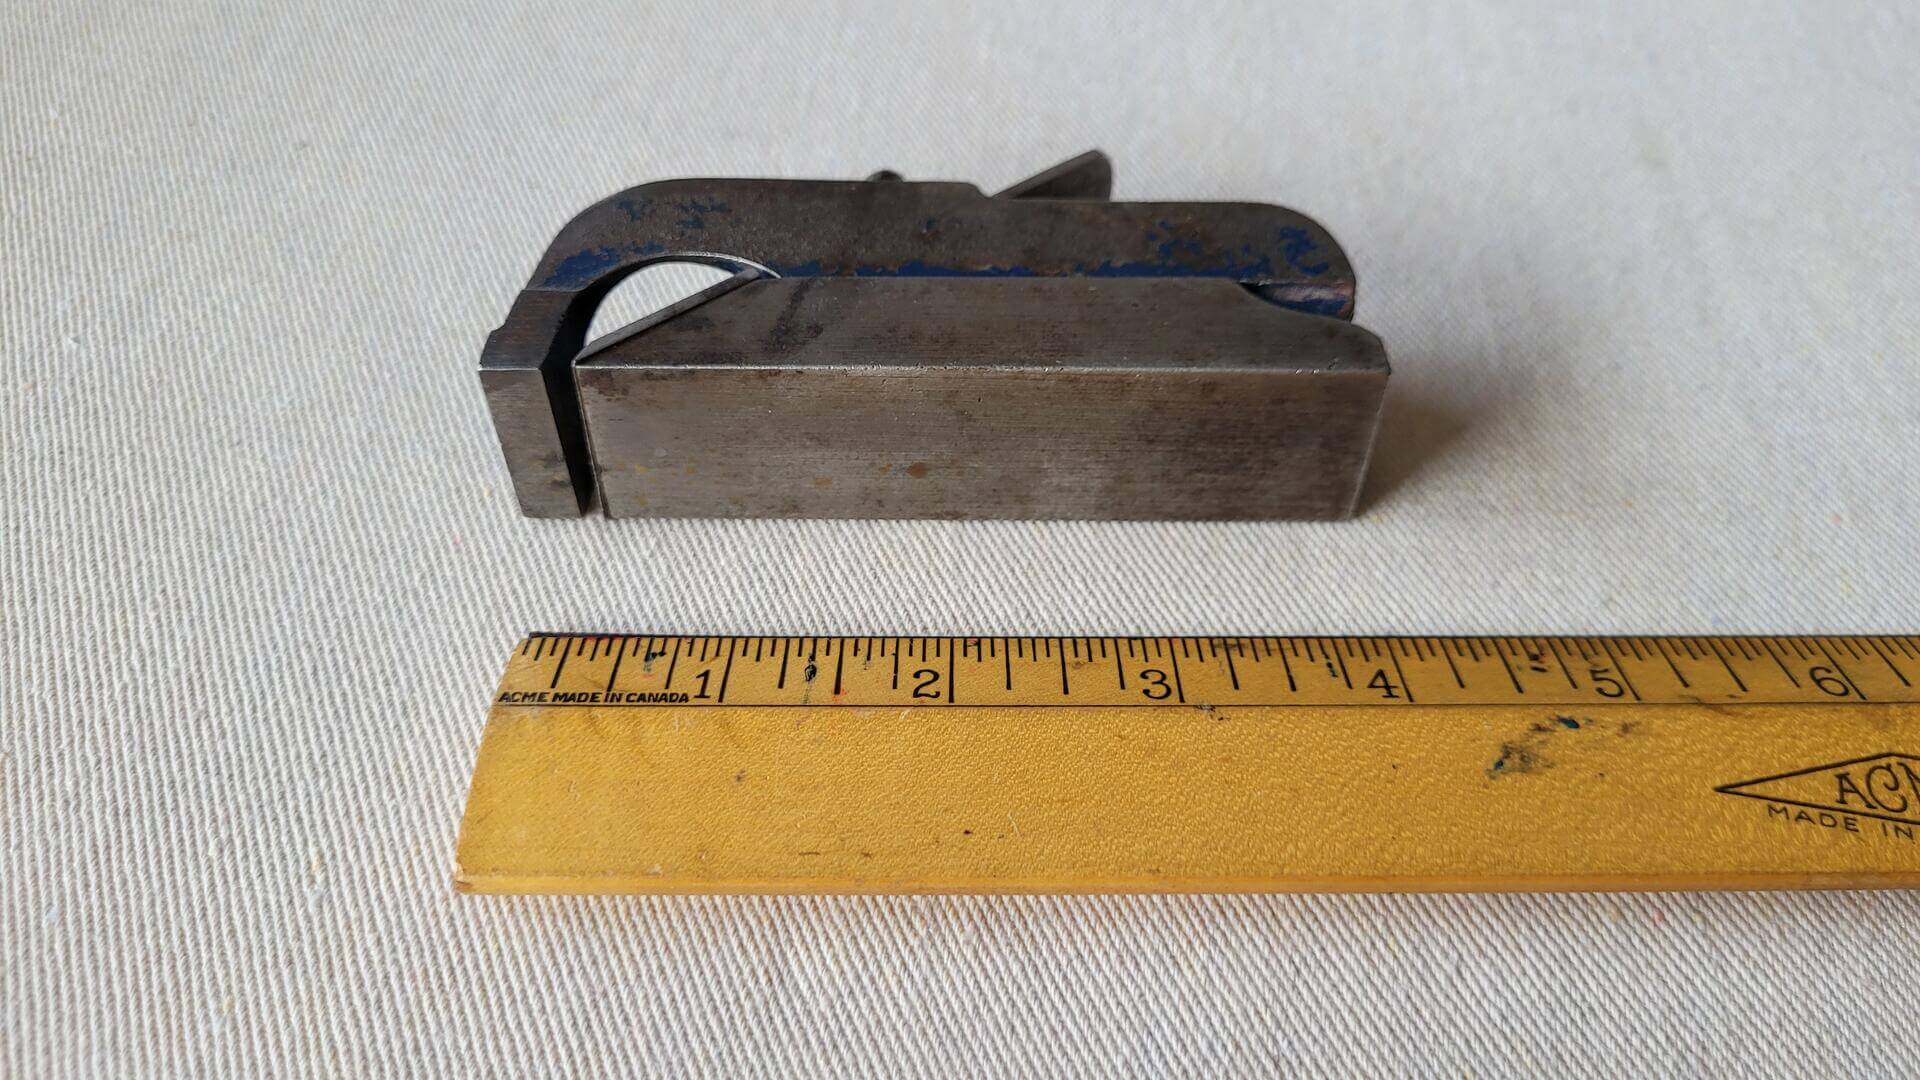 Vintage Record No. 075 cast iron bullnose rabbet plane japanned blue finish. Antique made in Sheffield England collectible carpentry woodworking hand tools